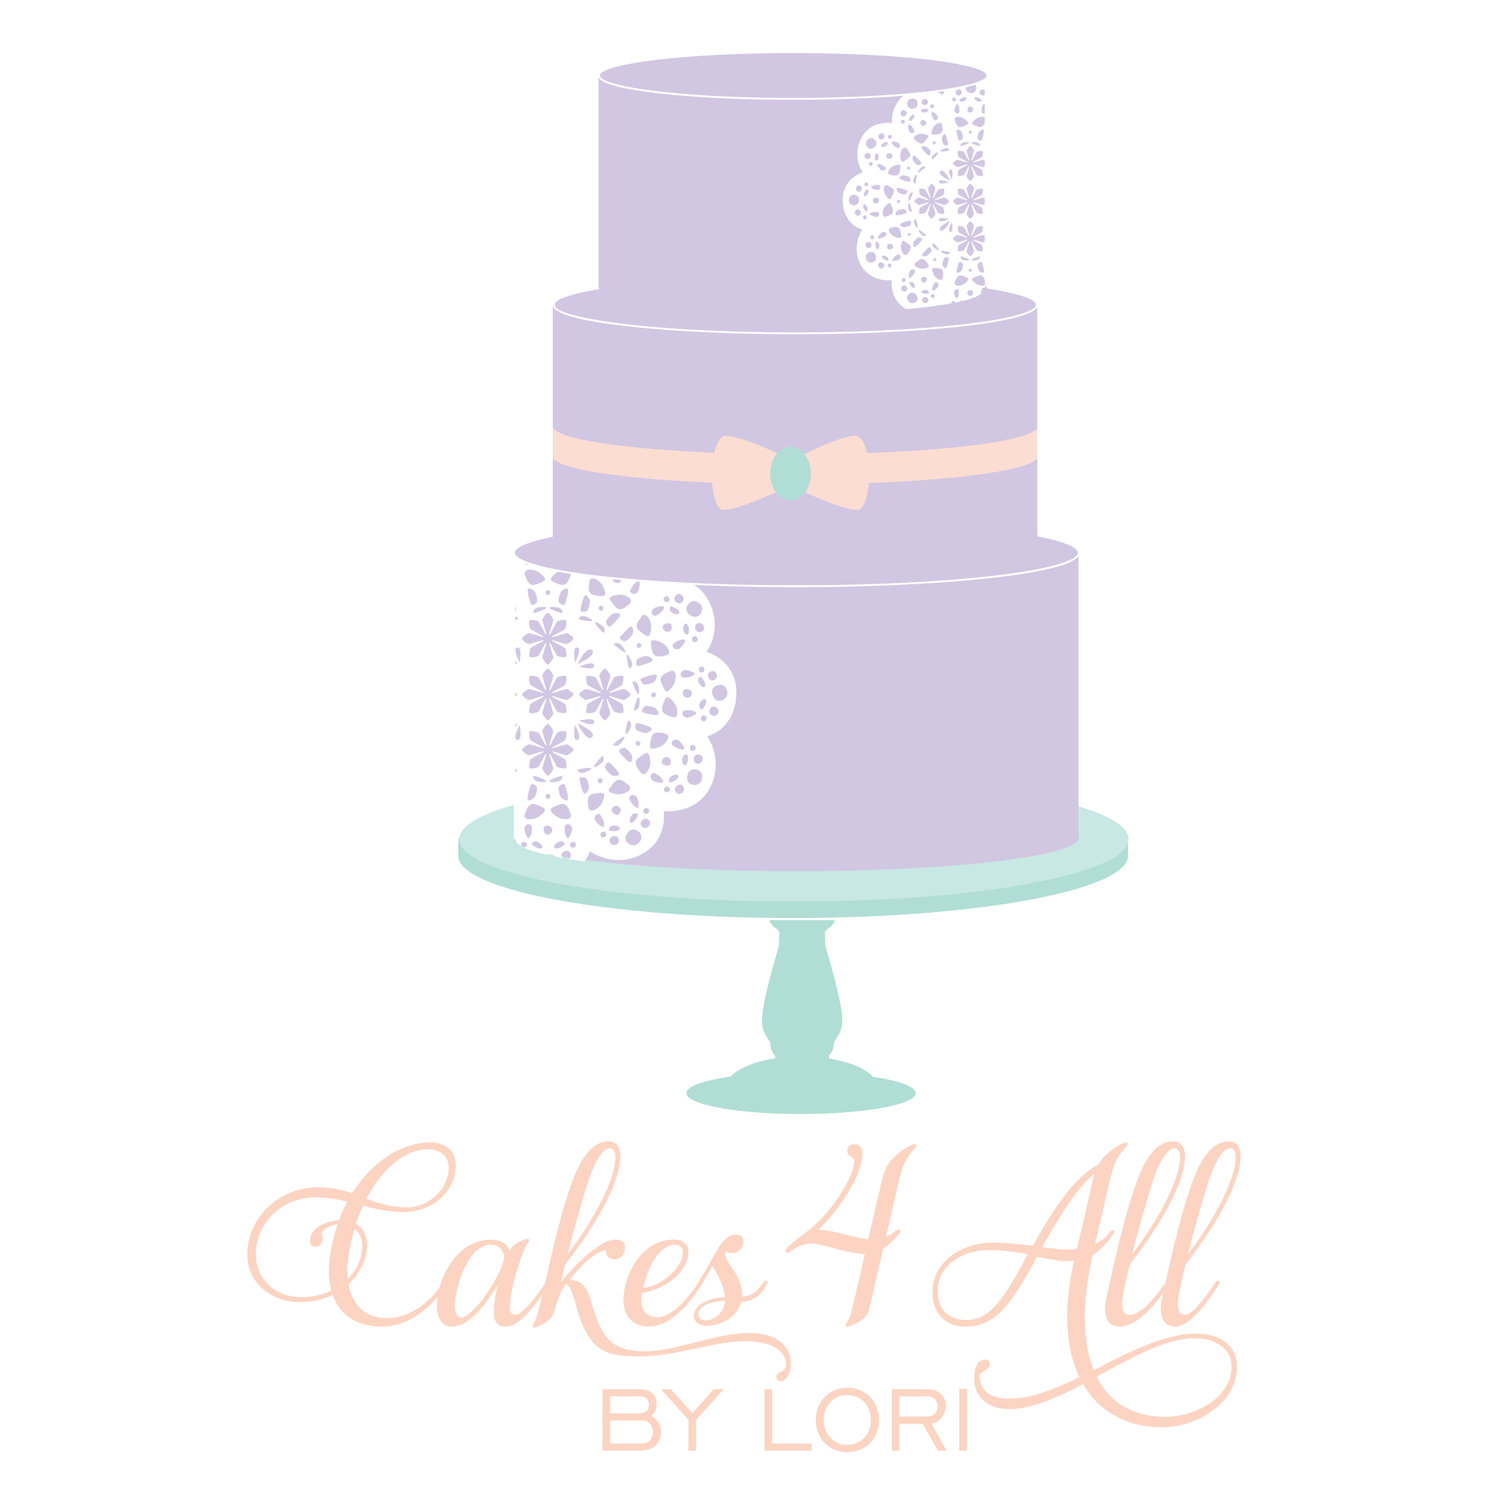 Cakes 4 All - by Lori